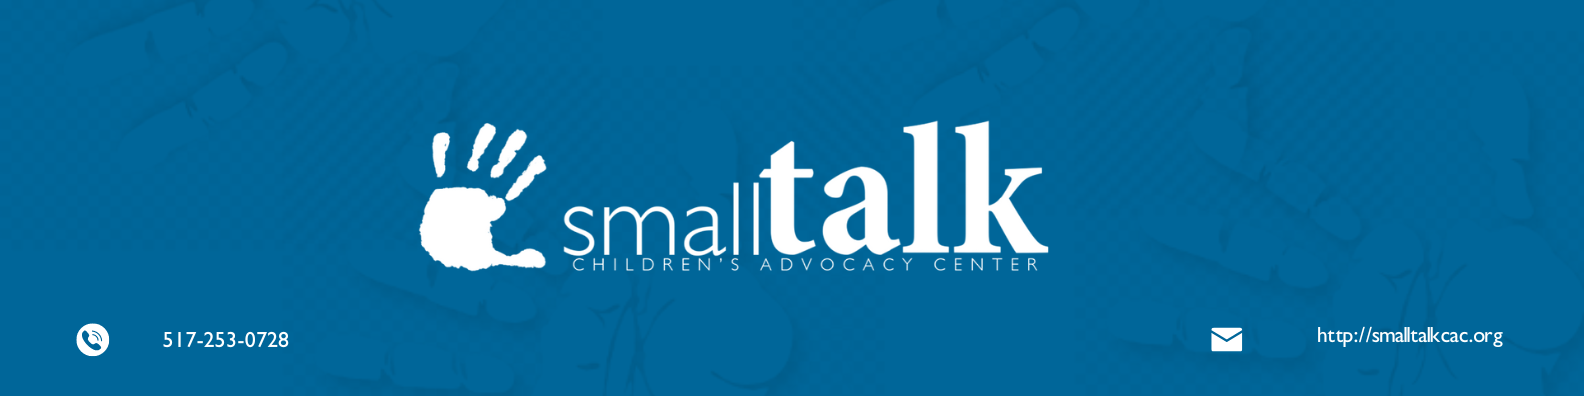 LinkedIn Header Image that says "Small Talk Children's Advocacy Center" with the phone number 517-253-0728 and website link.